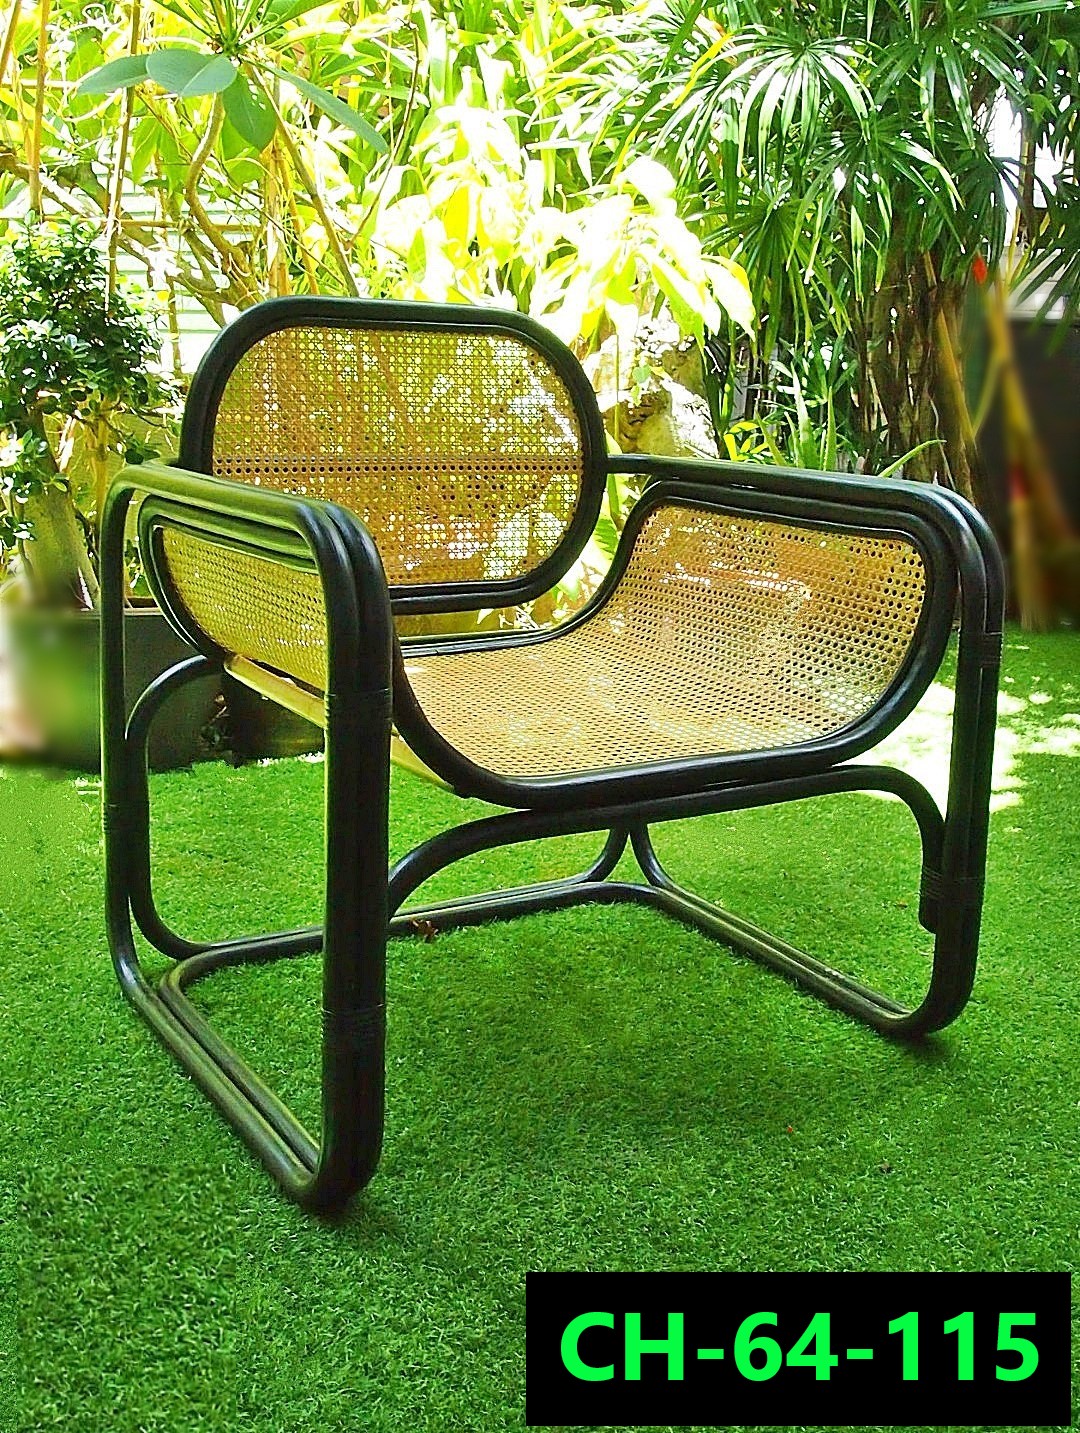 Rattan Chair set Product code CH-64-115